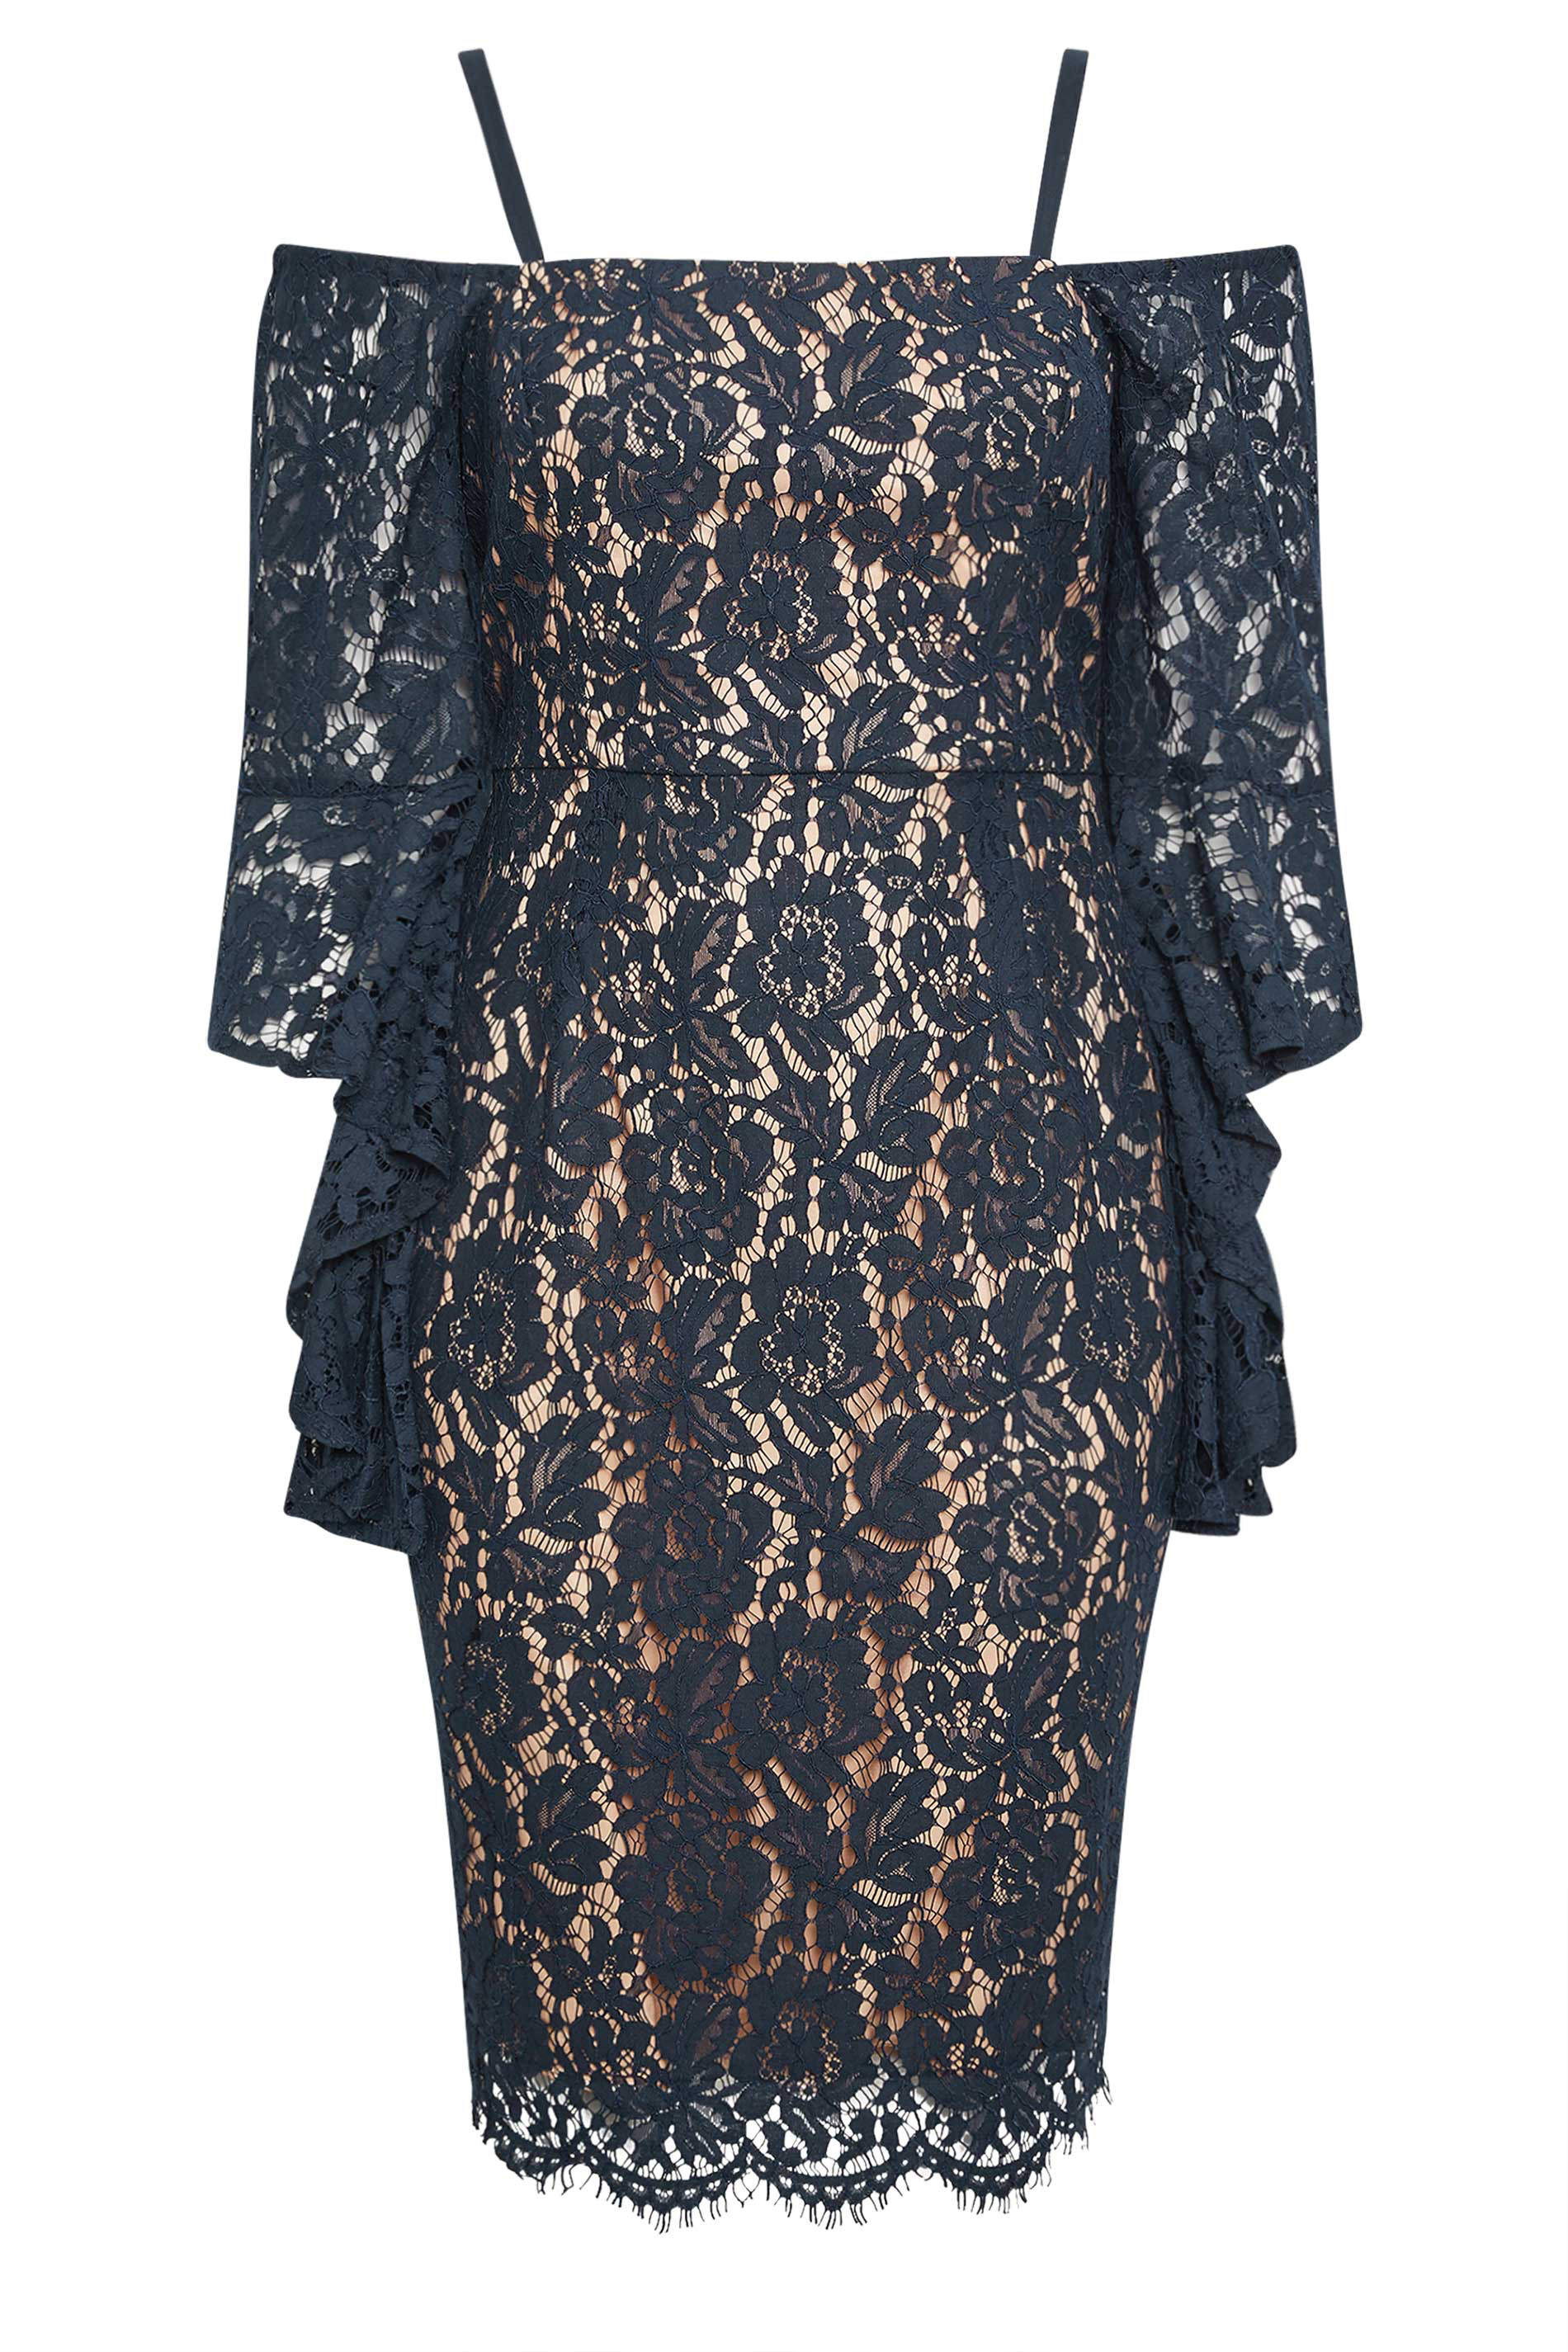 Endearing Love Navy Scallop Lace Dress